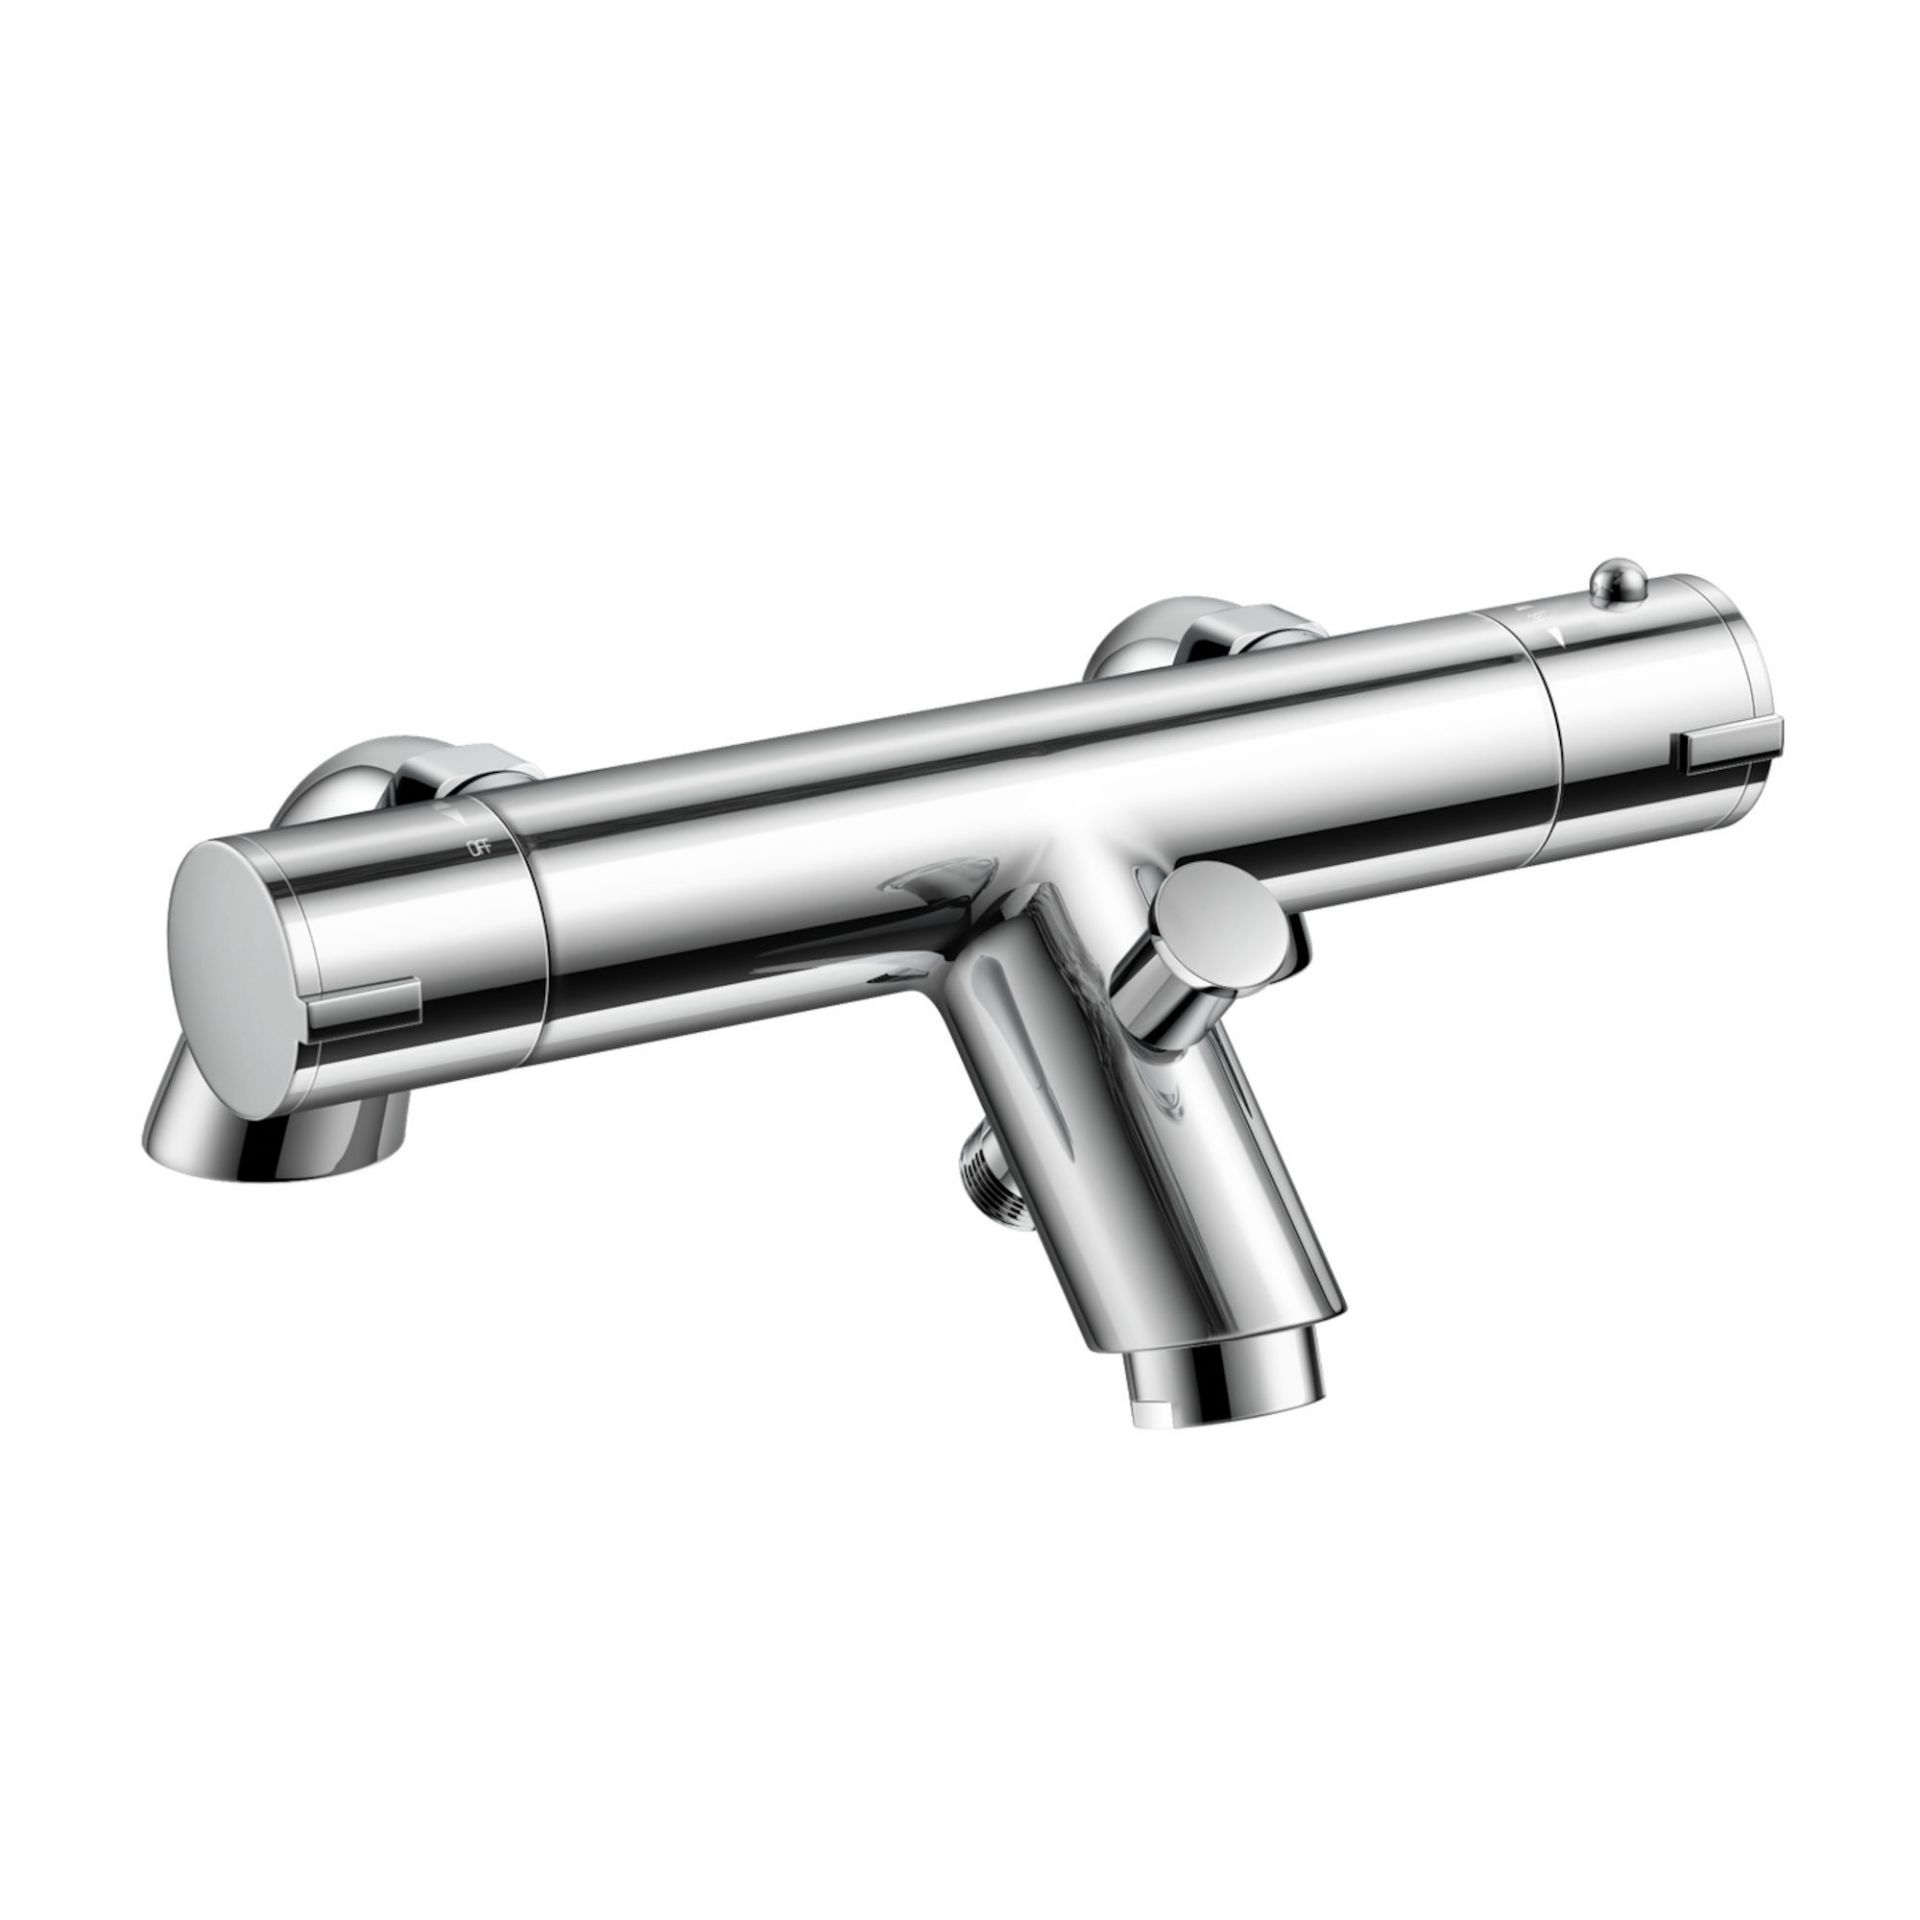 (G14) Thermostatic Deck Mounted Shower Mixer and Bath Filler. Chrome plated solid brass mixer